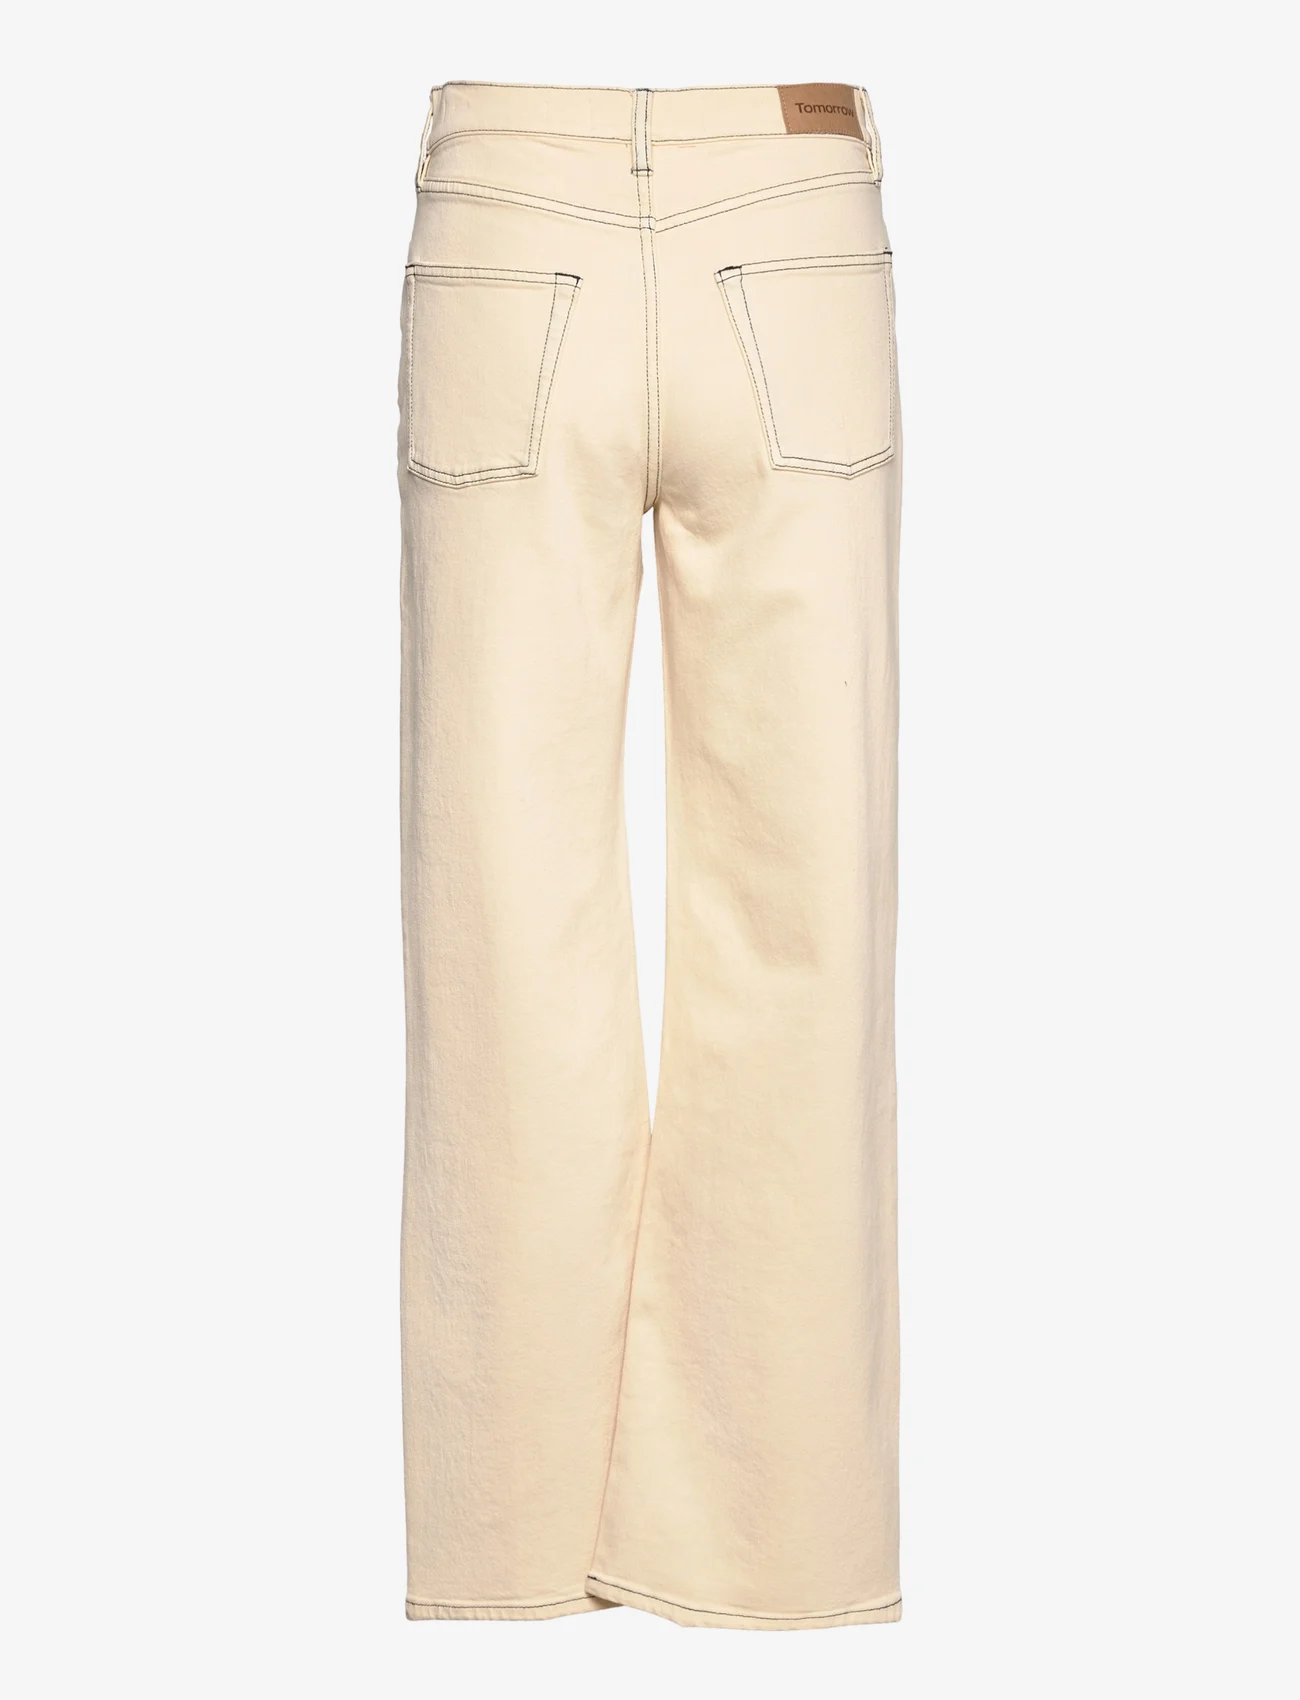 Tomorrow - Brown Straight Jeans Natural Color - hosen mit weitem bein - mariegold yellow - 1